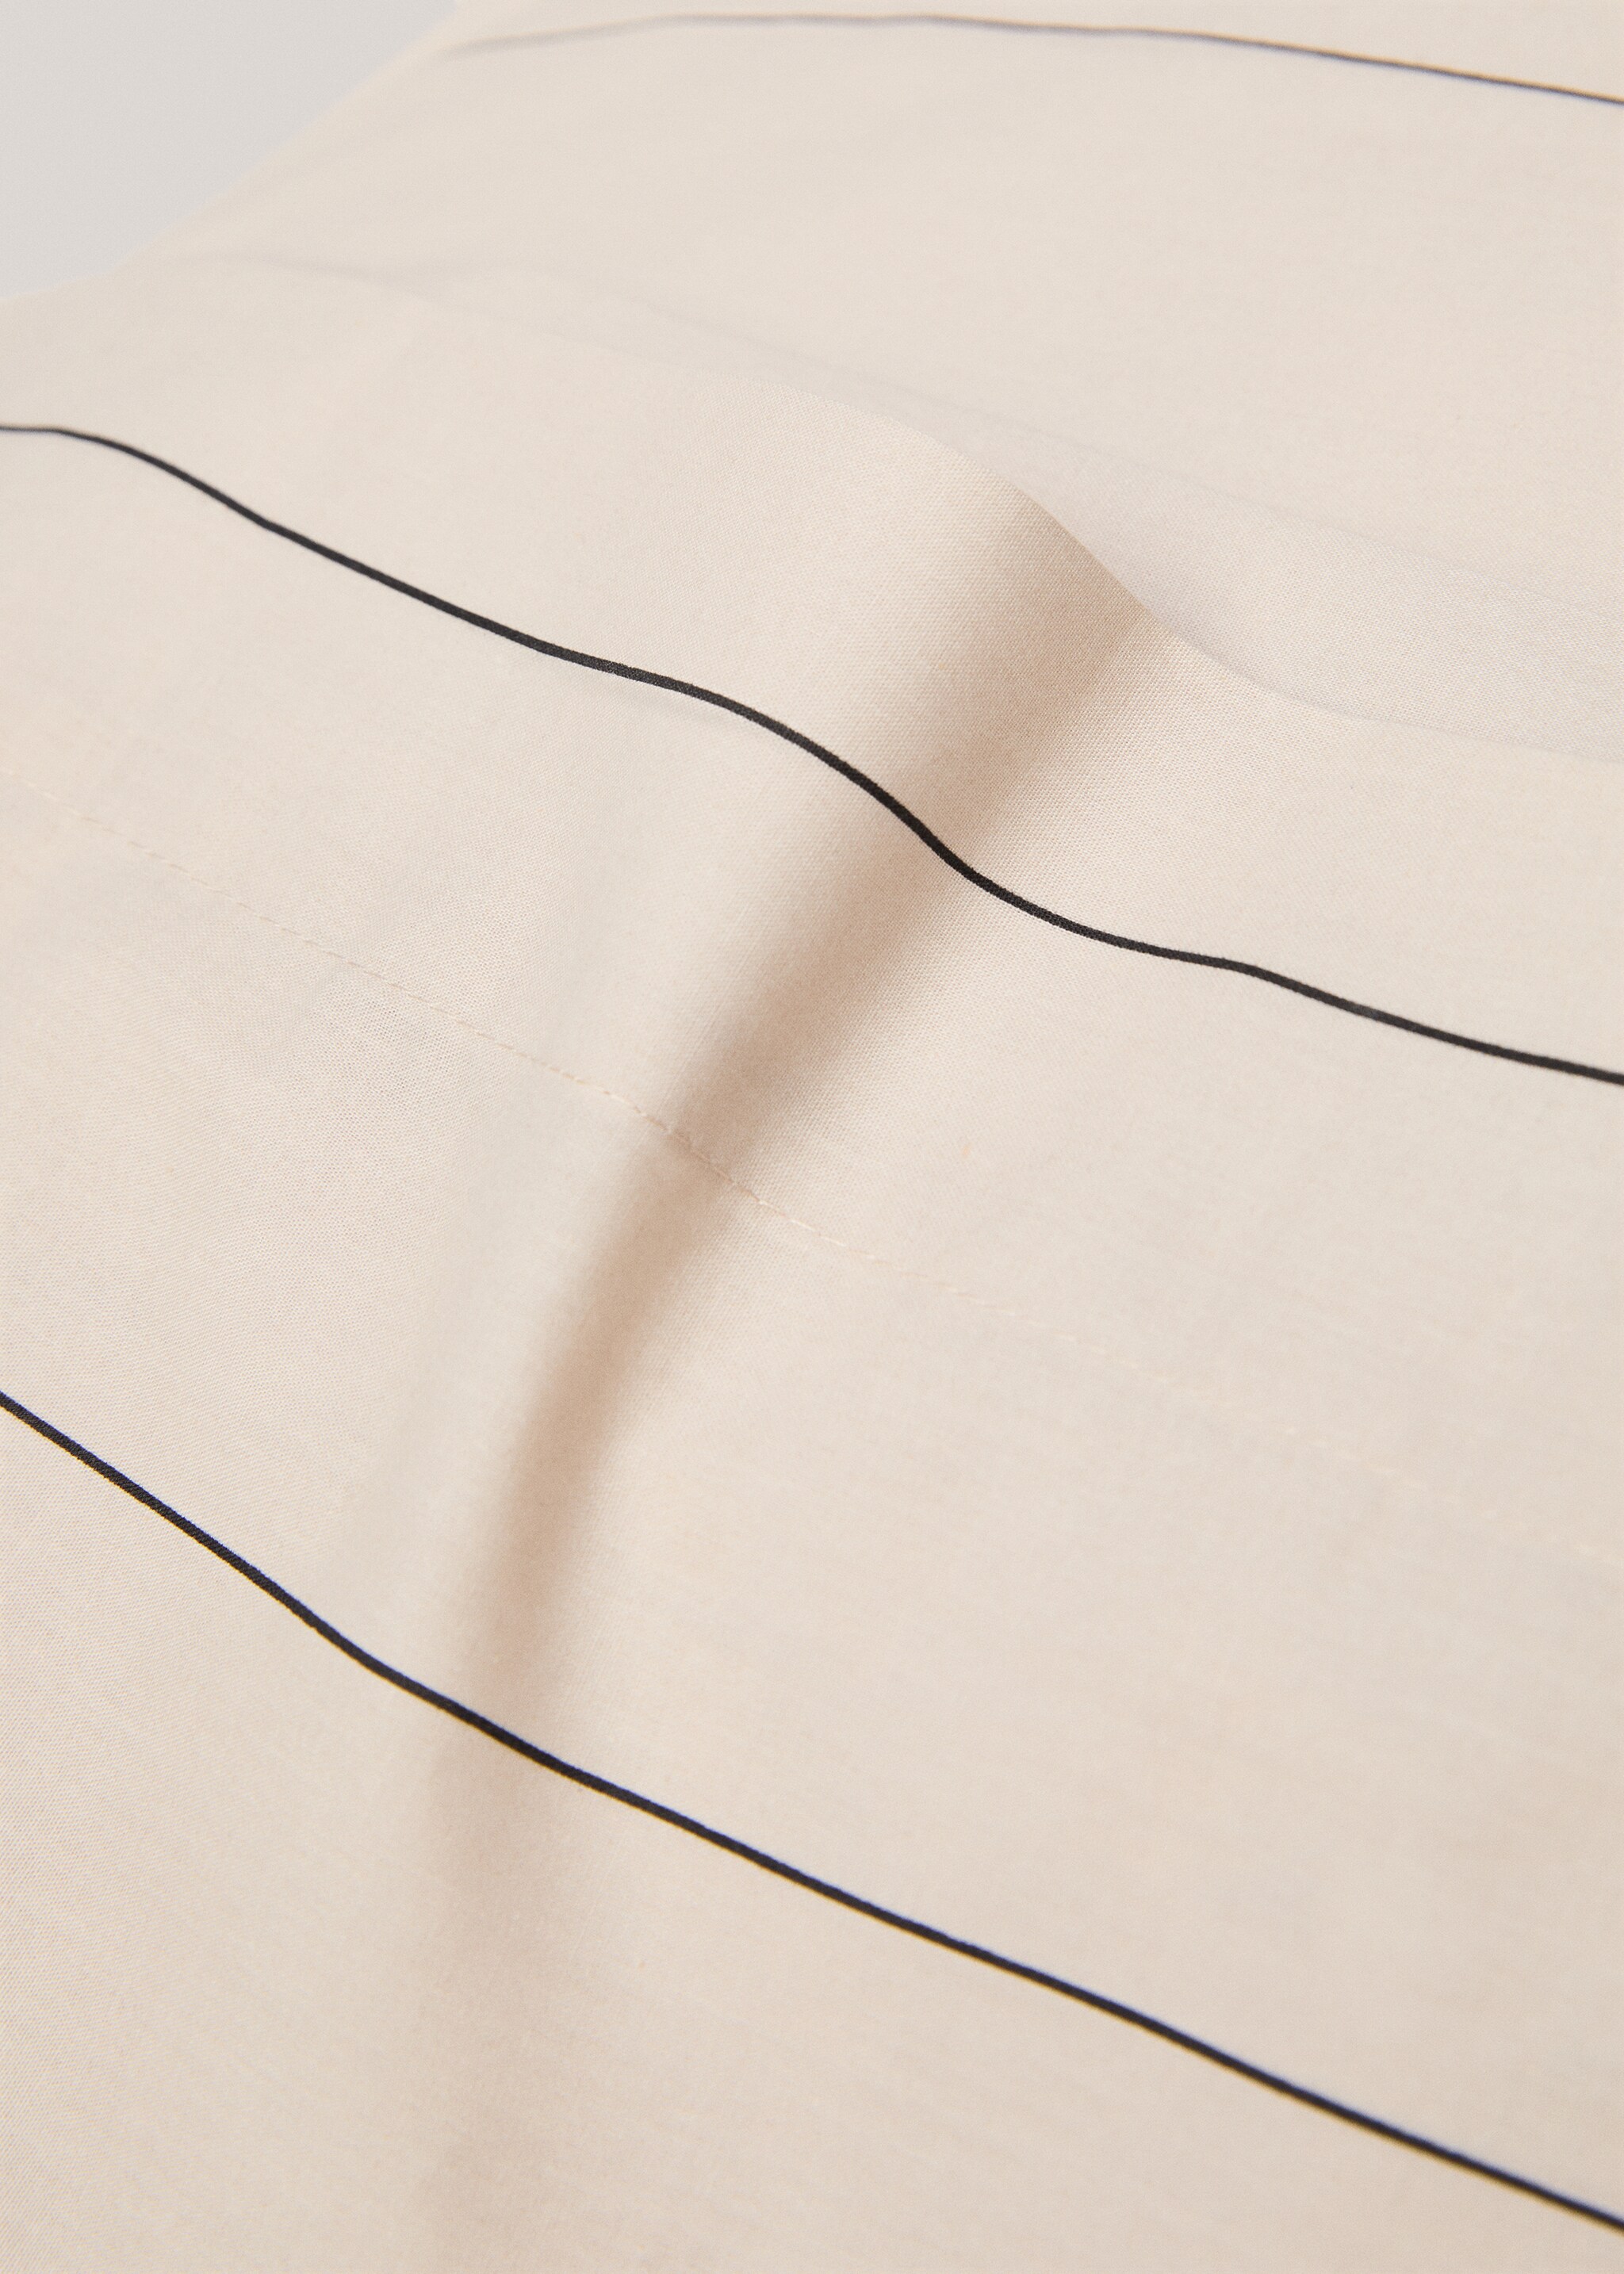 100% cotton striped pillowcase 45x110cm - Details of the article 1